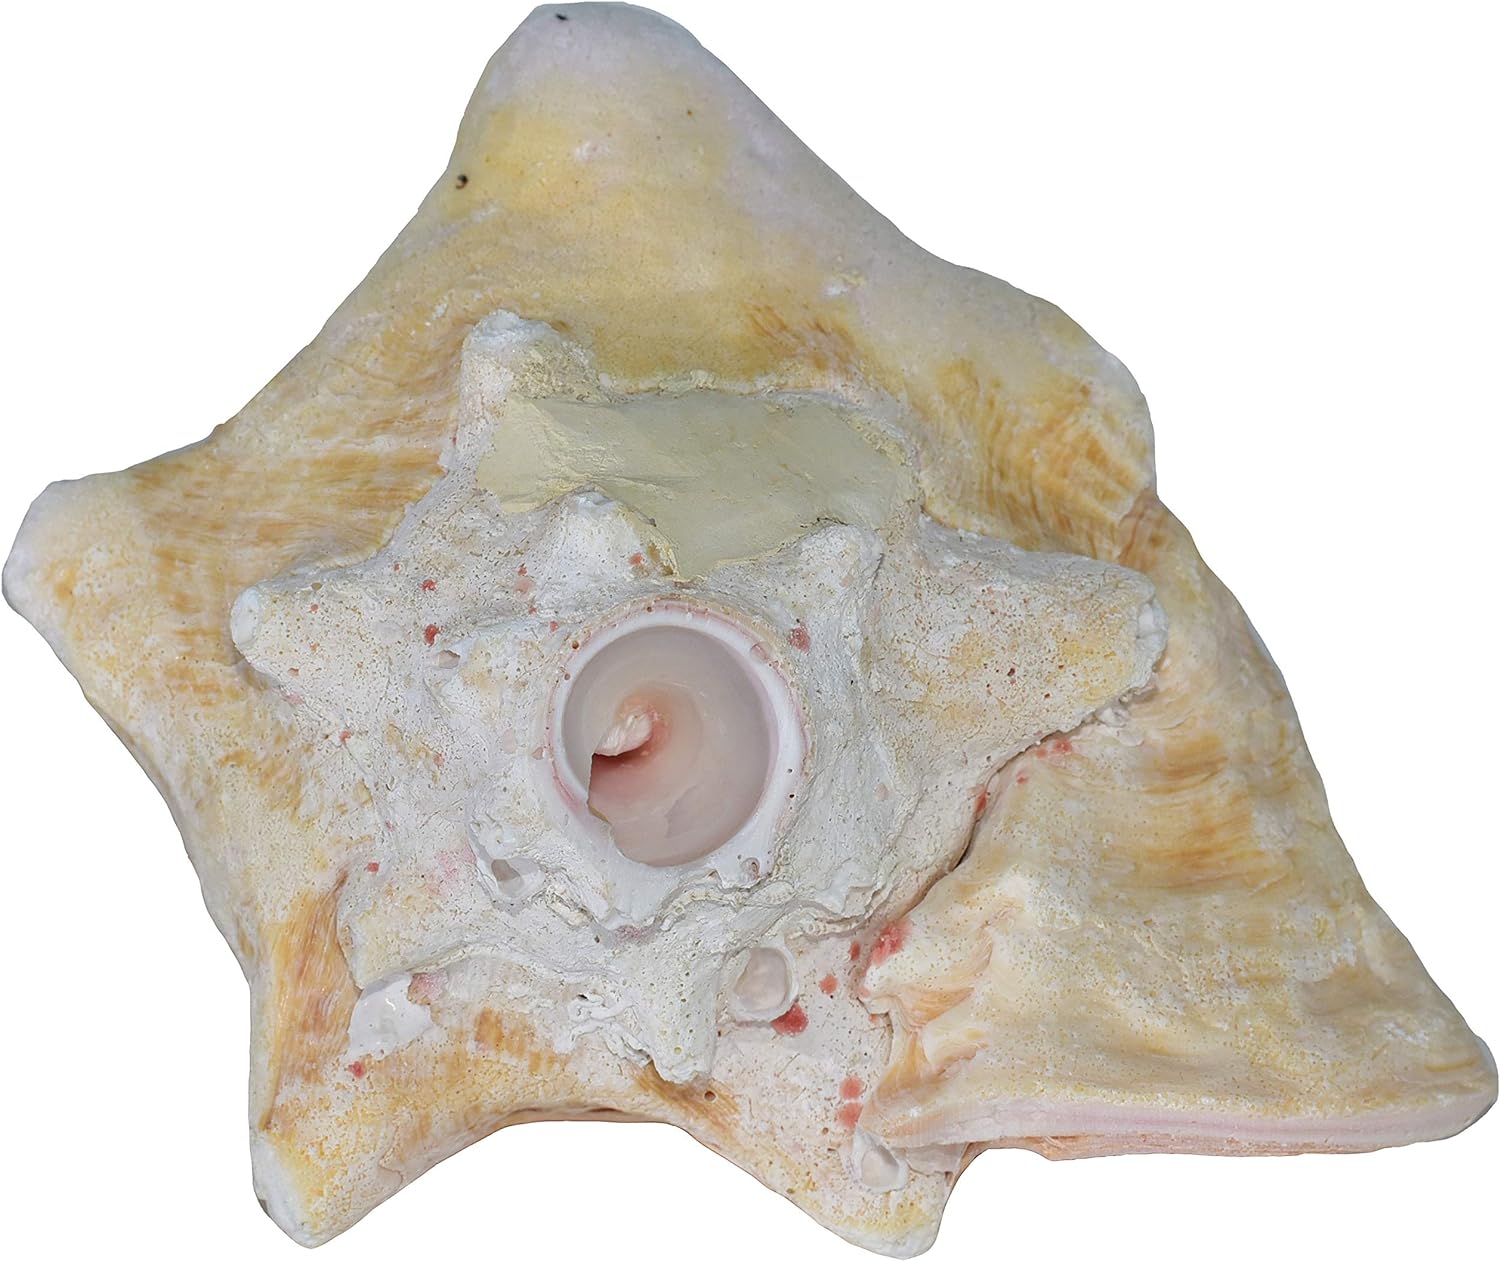 Large Bahama Conch Shell Horn (Pink) - 7-9 inch